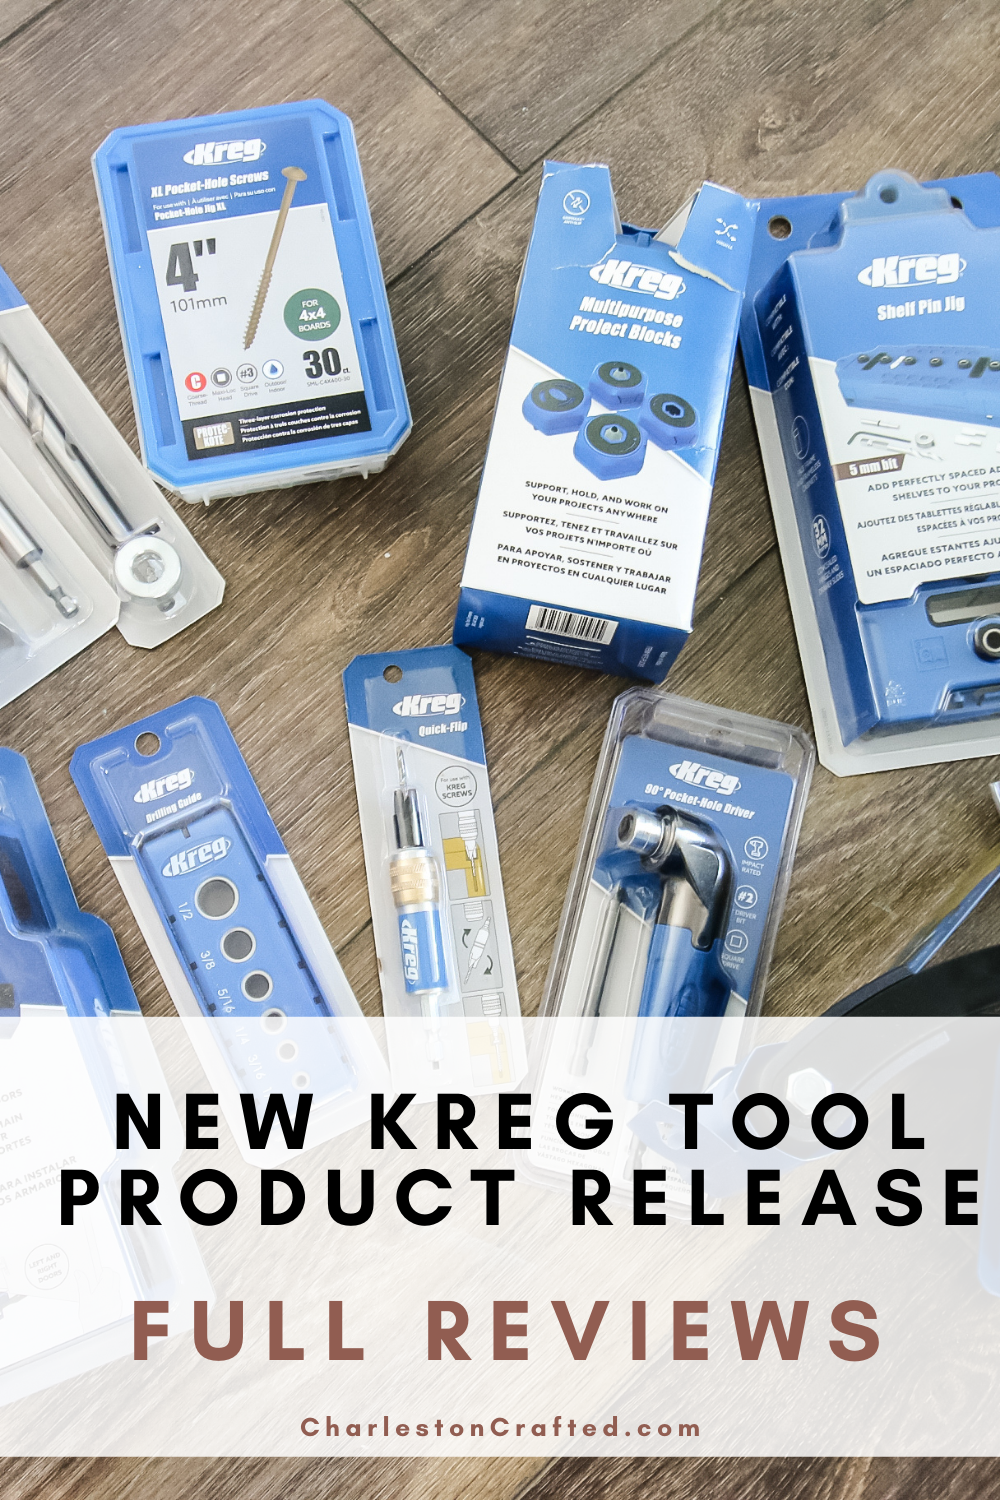 Kreg Tool March 2022 new product release (full product reviews!)